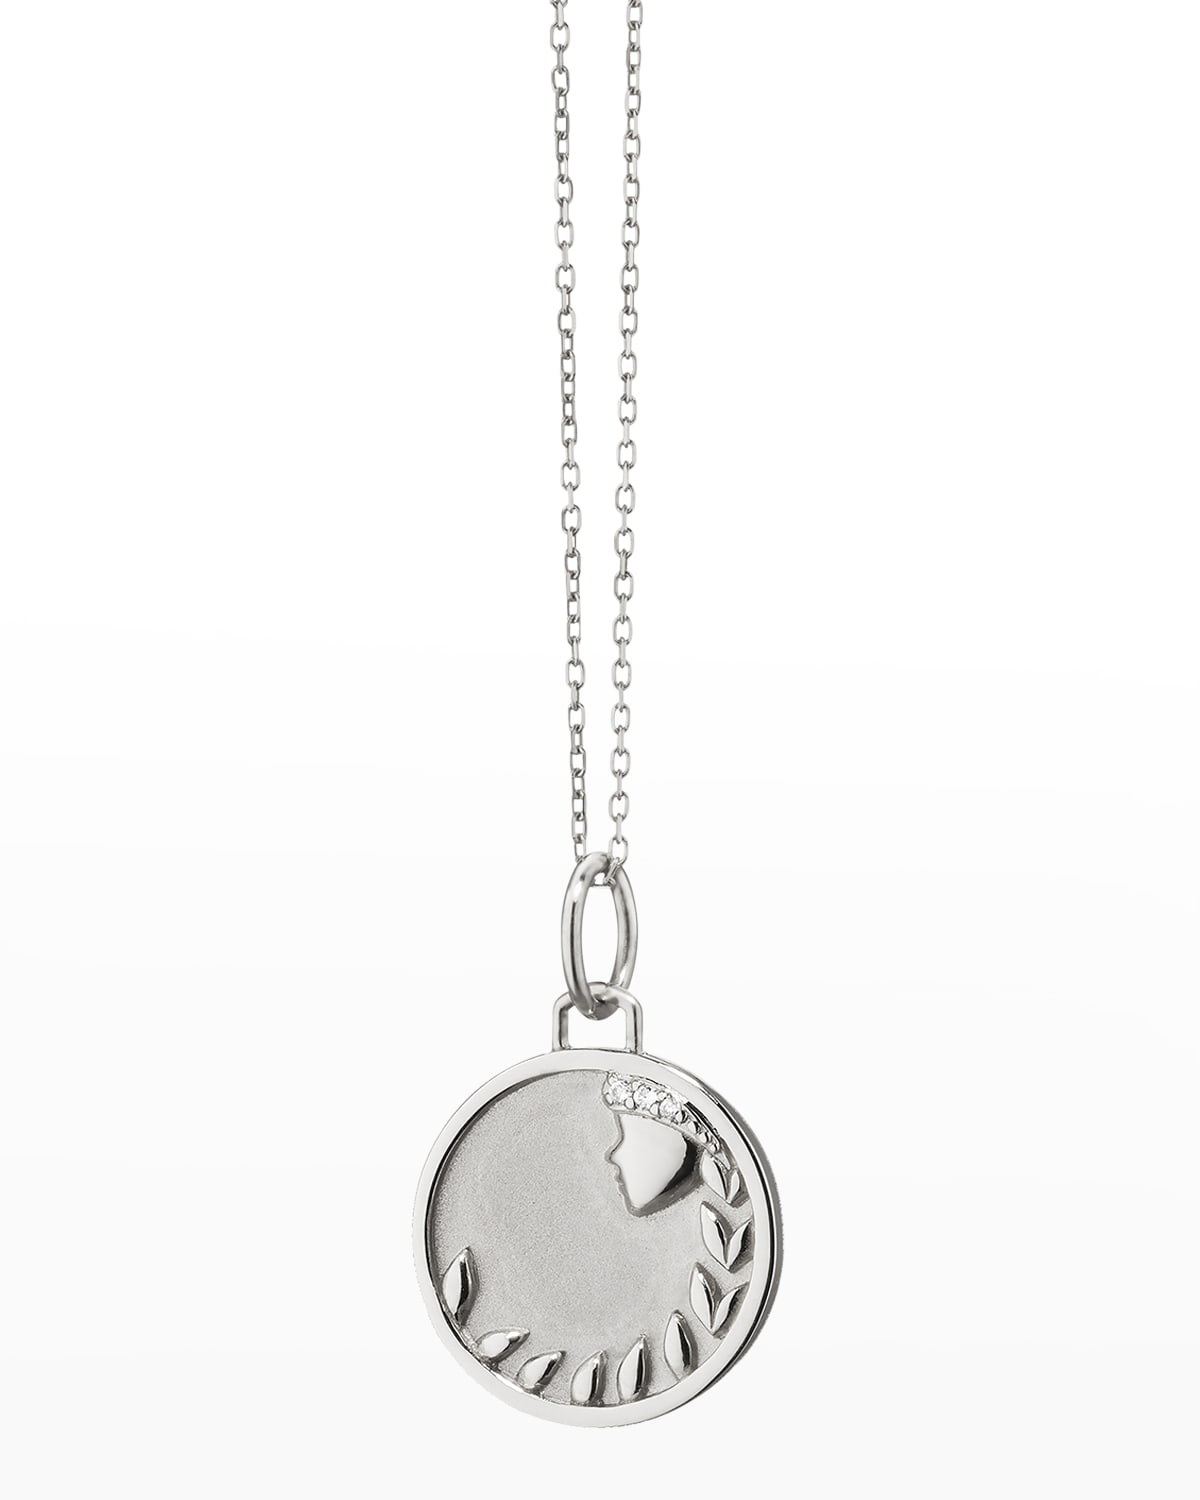 Sterling Silver Virgo Zodiac Charm Necklace with White Sapphires